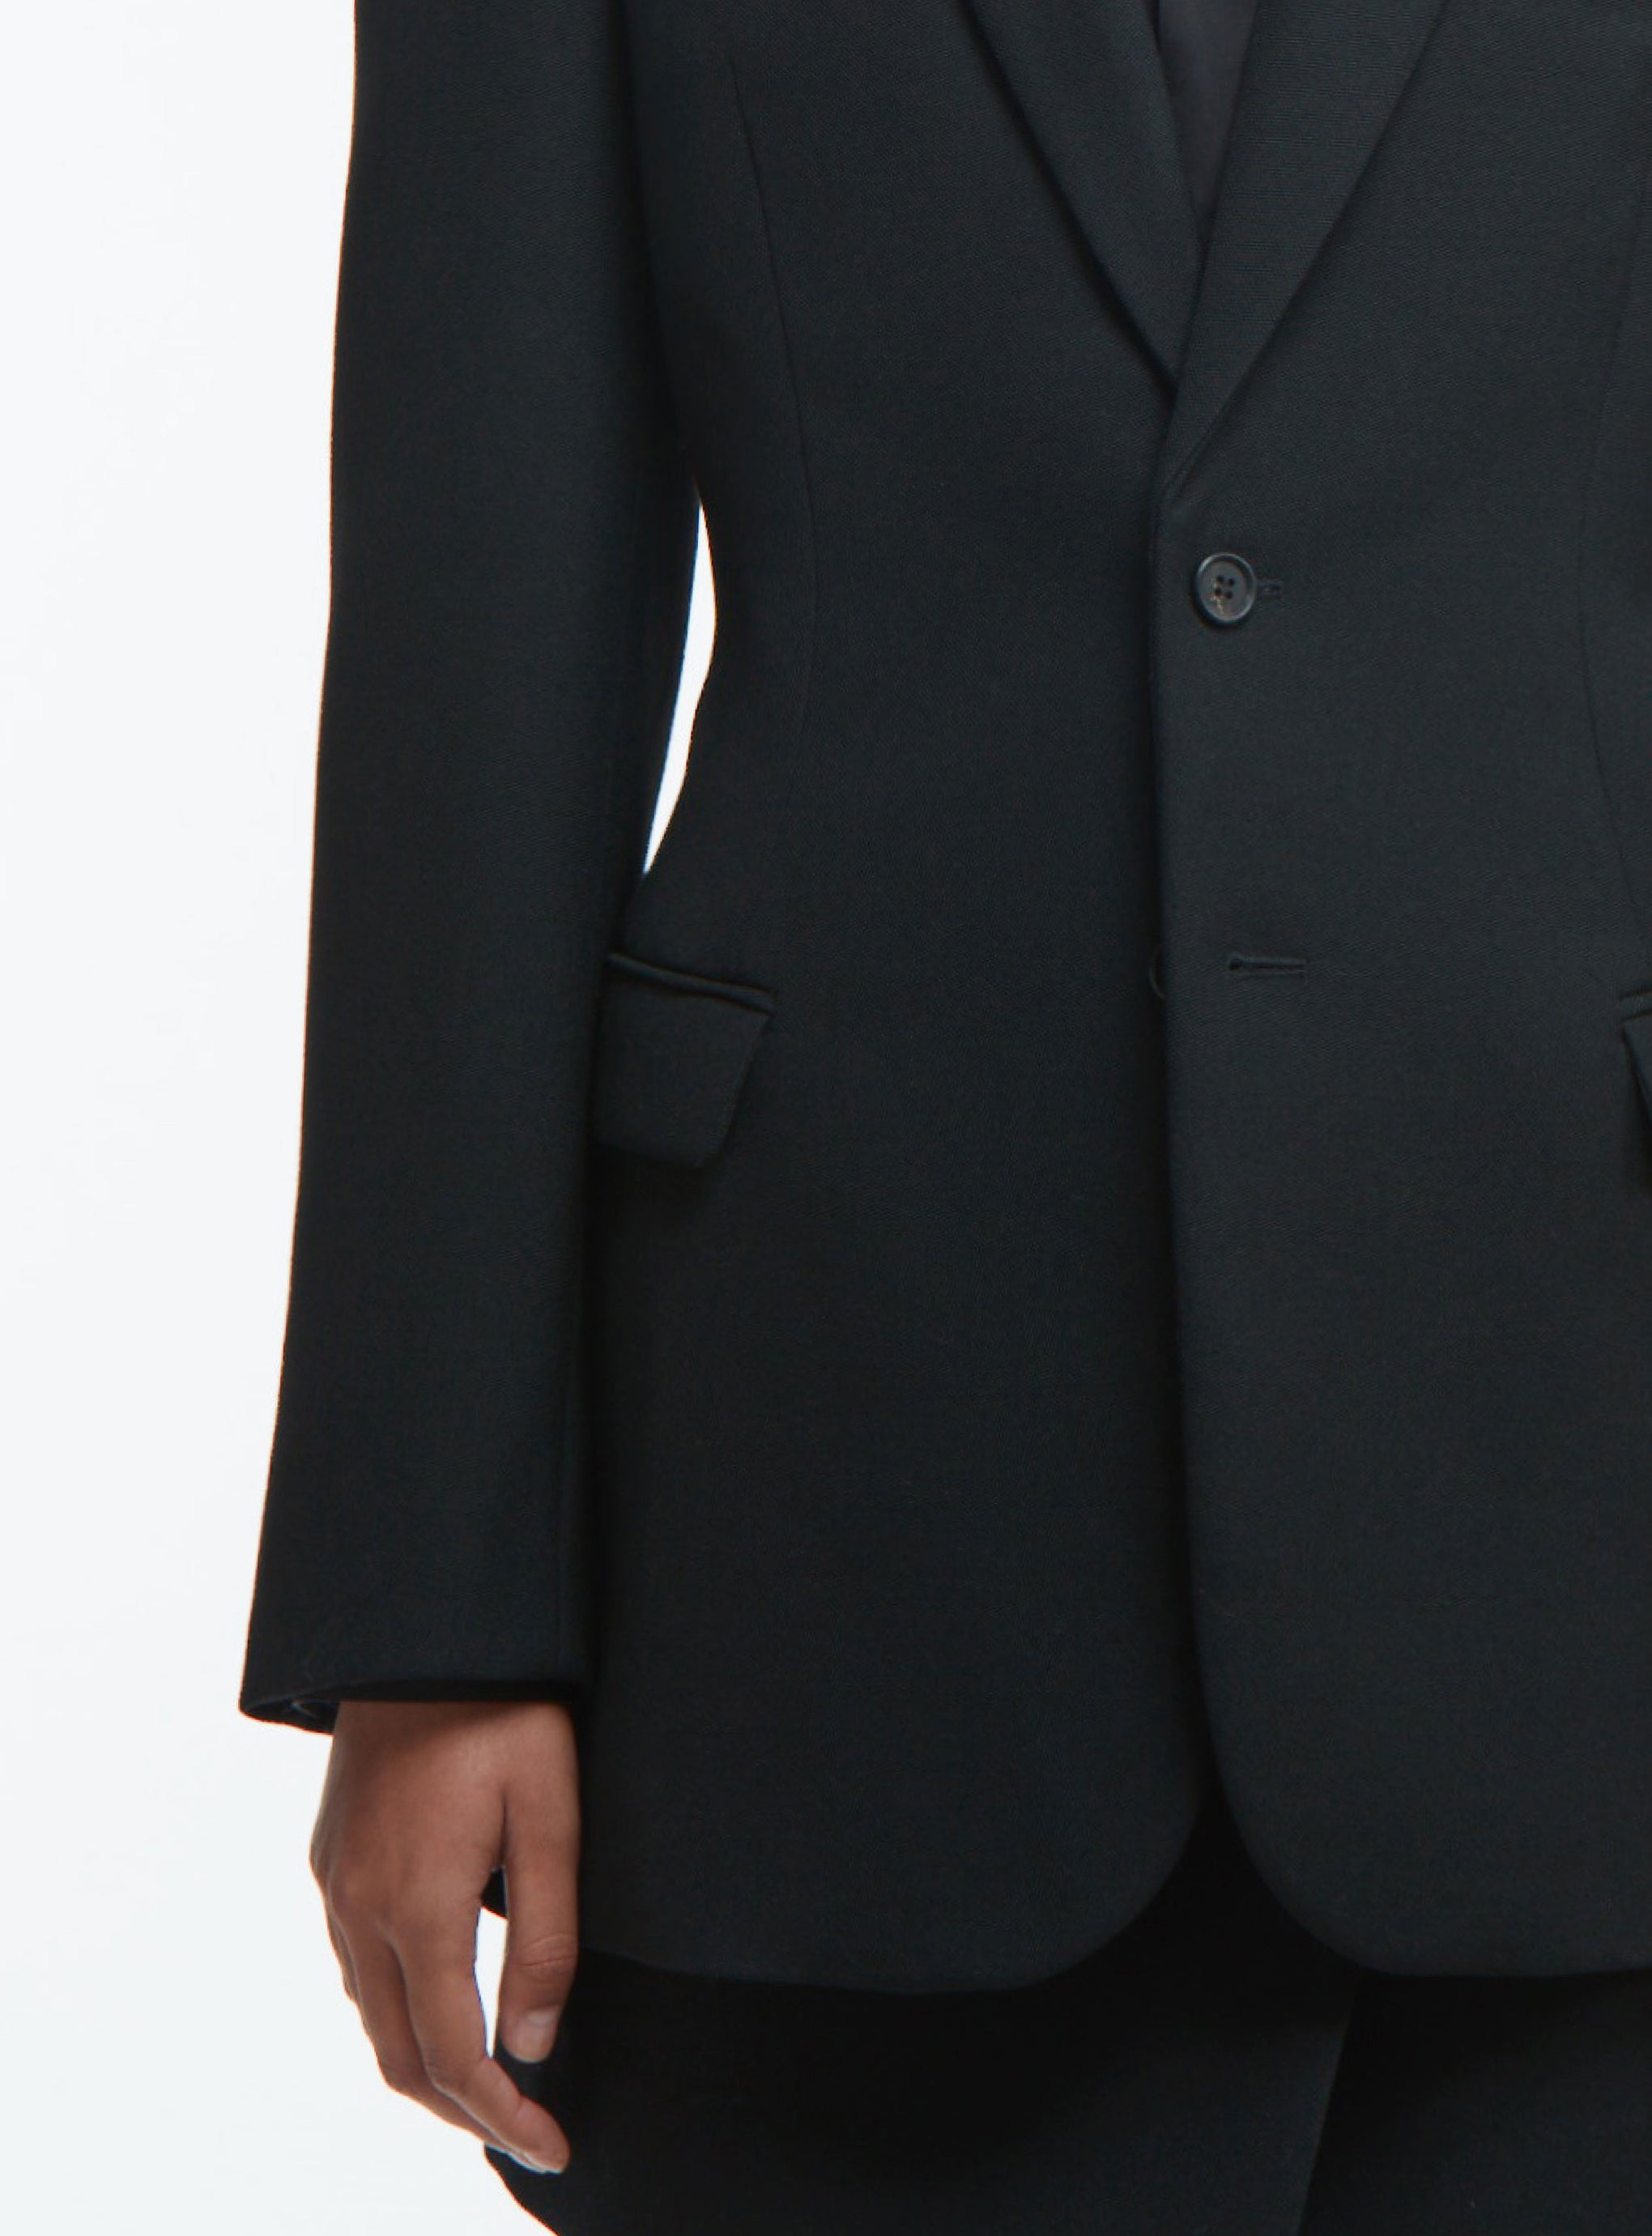 The Wardrobe NYC Contour Blazer in Black available at The New Trend Australia